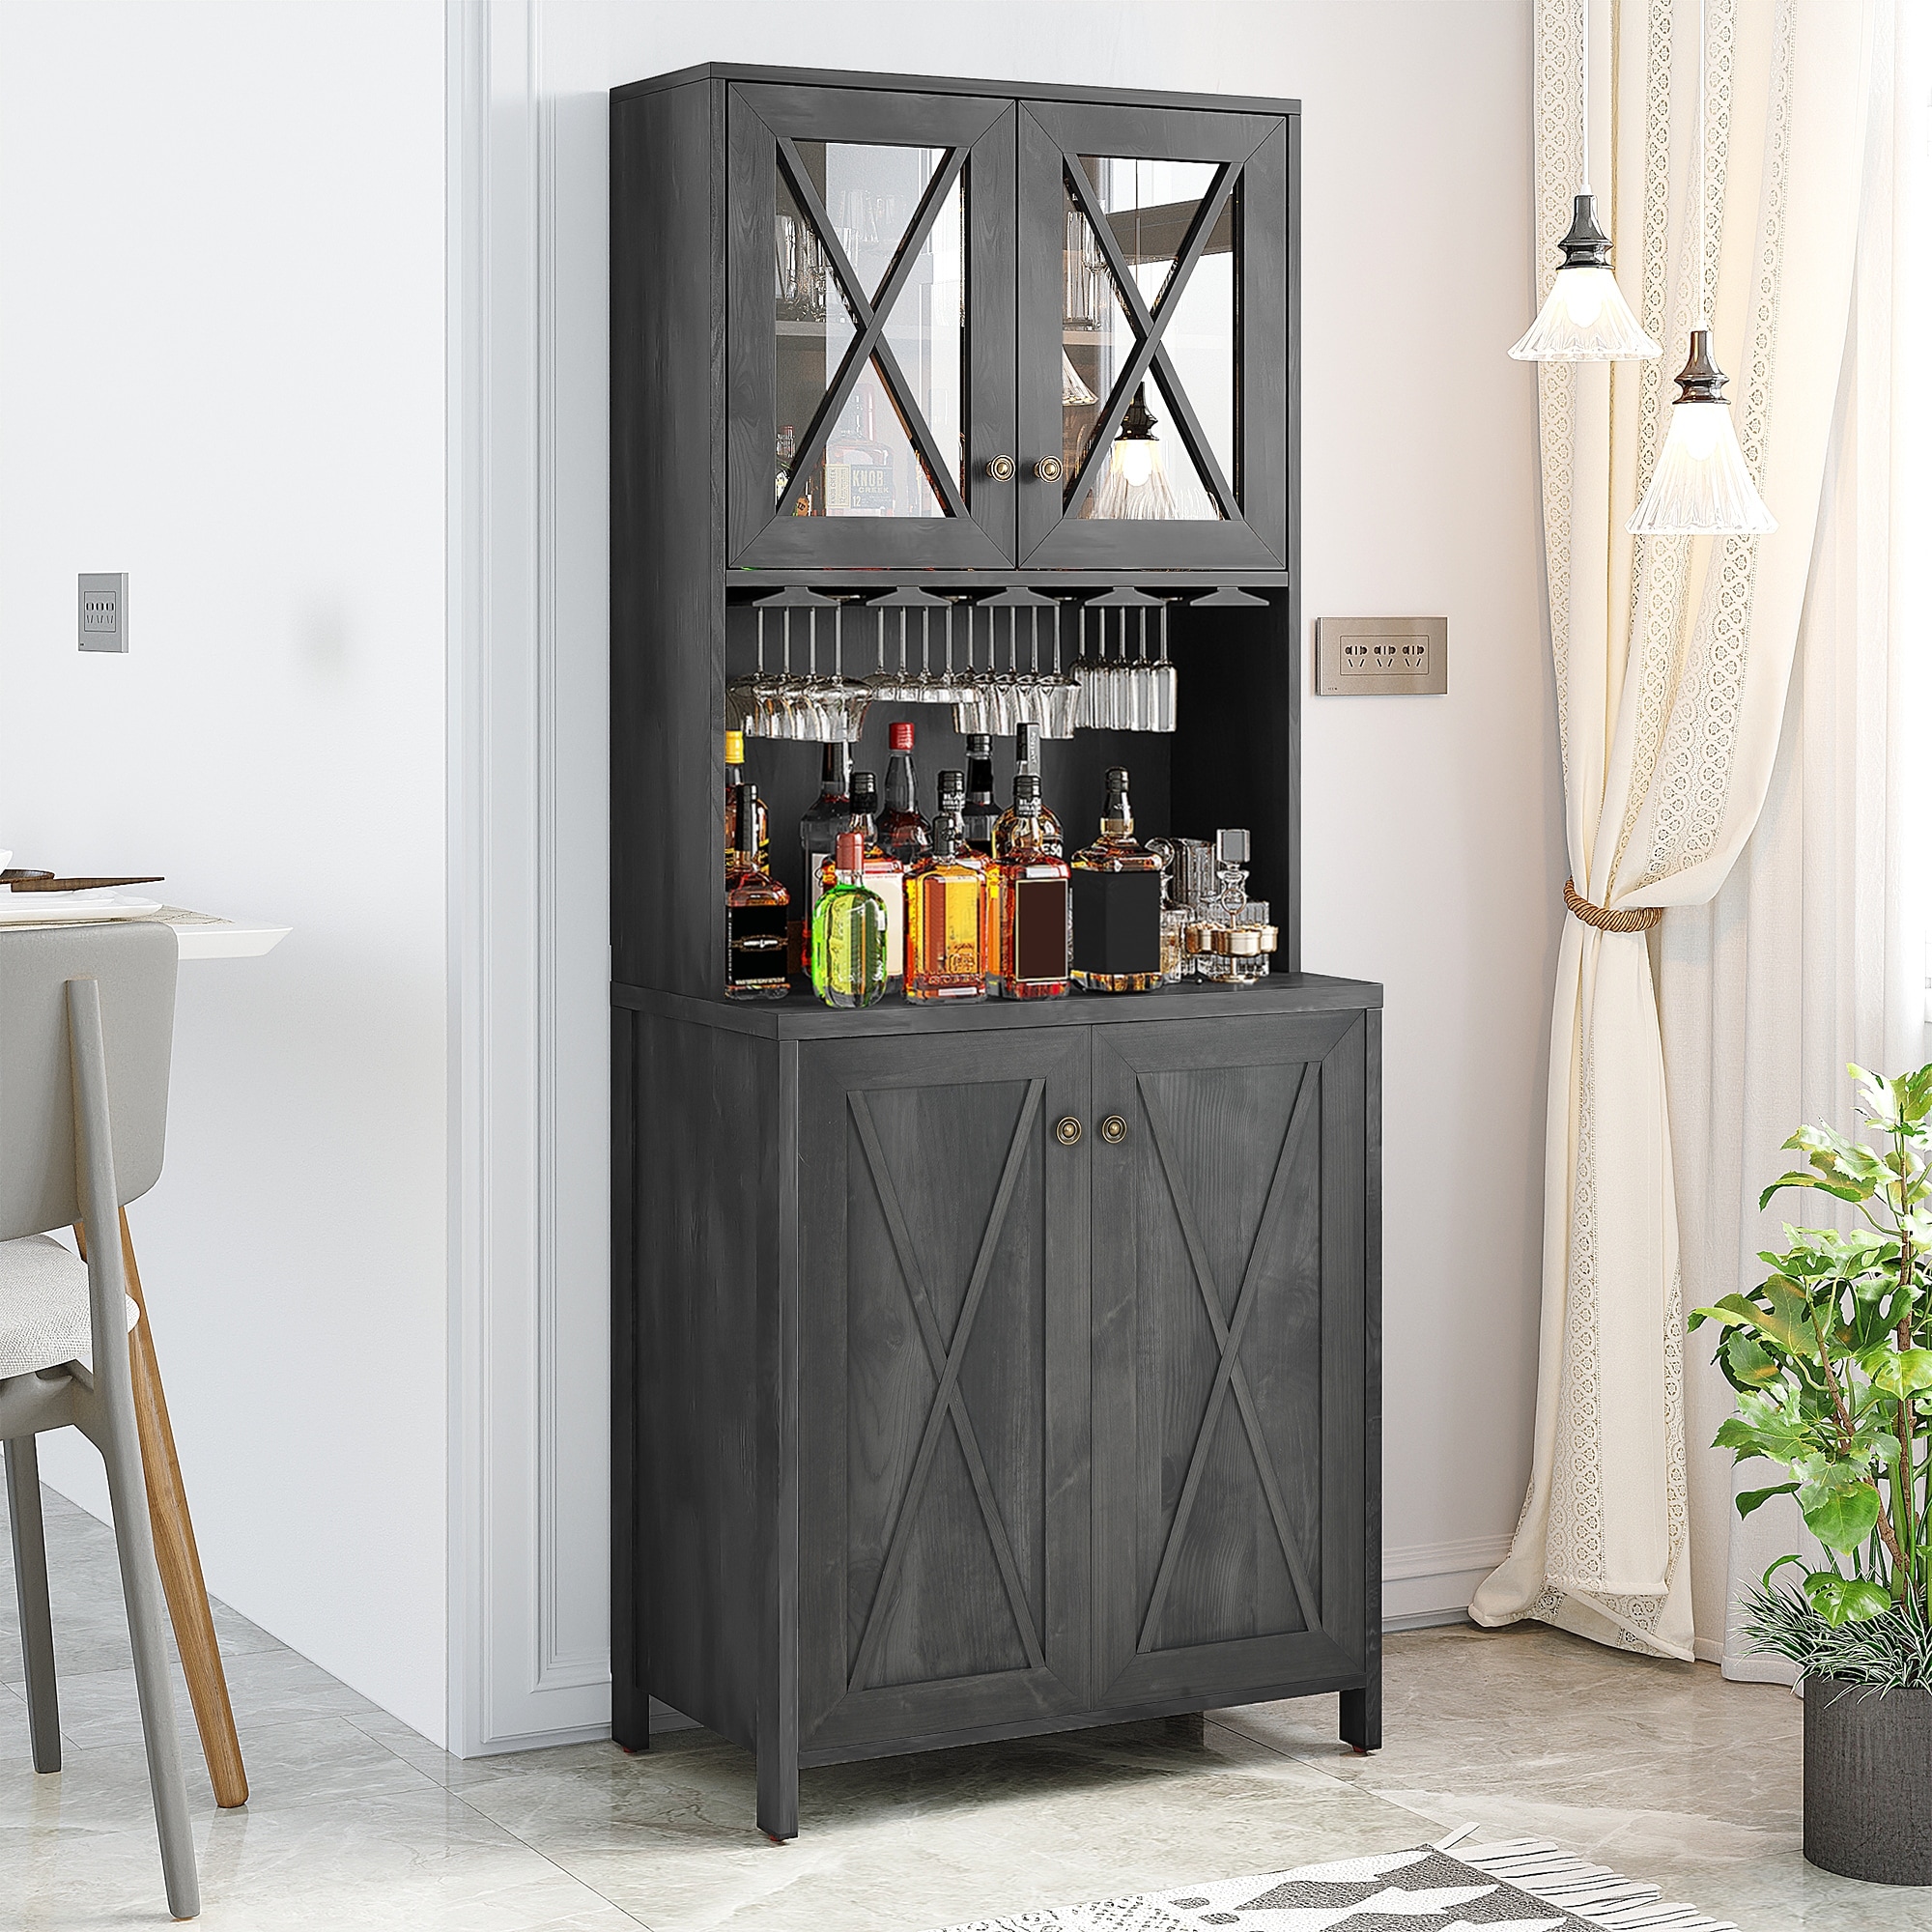 https://ak1.ostkcdn.com/images/products/is/images/direct/c89ad6d7cf84cbe2487ea9297ef98295c3dce5b8/Farmhouse-Bar-Cabinet-for-Liquor-and-Glasses-for-Dining-Room-Kitchen-Cabinet-with-Wine-Rack.jpg